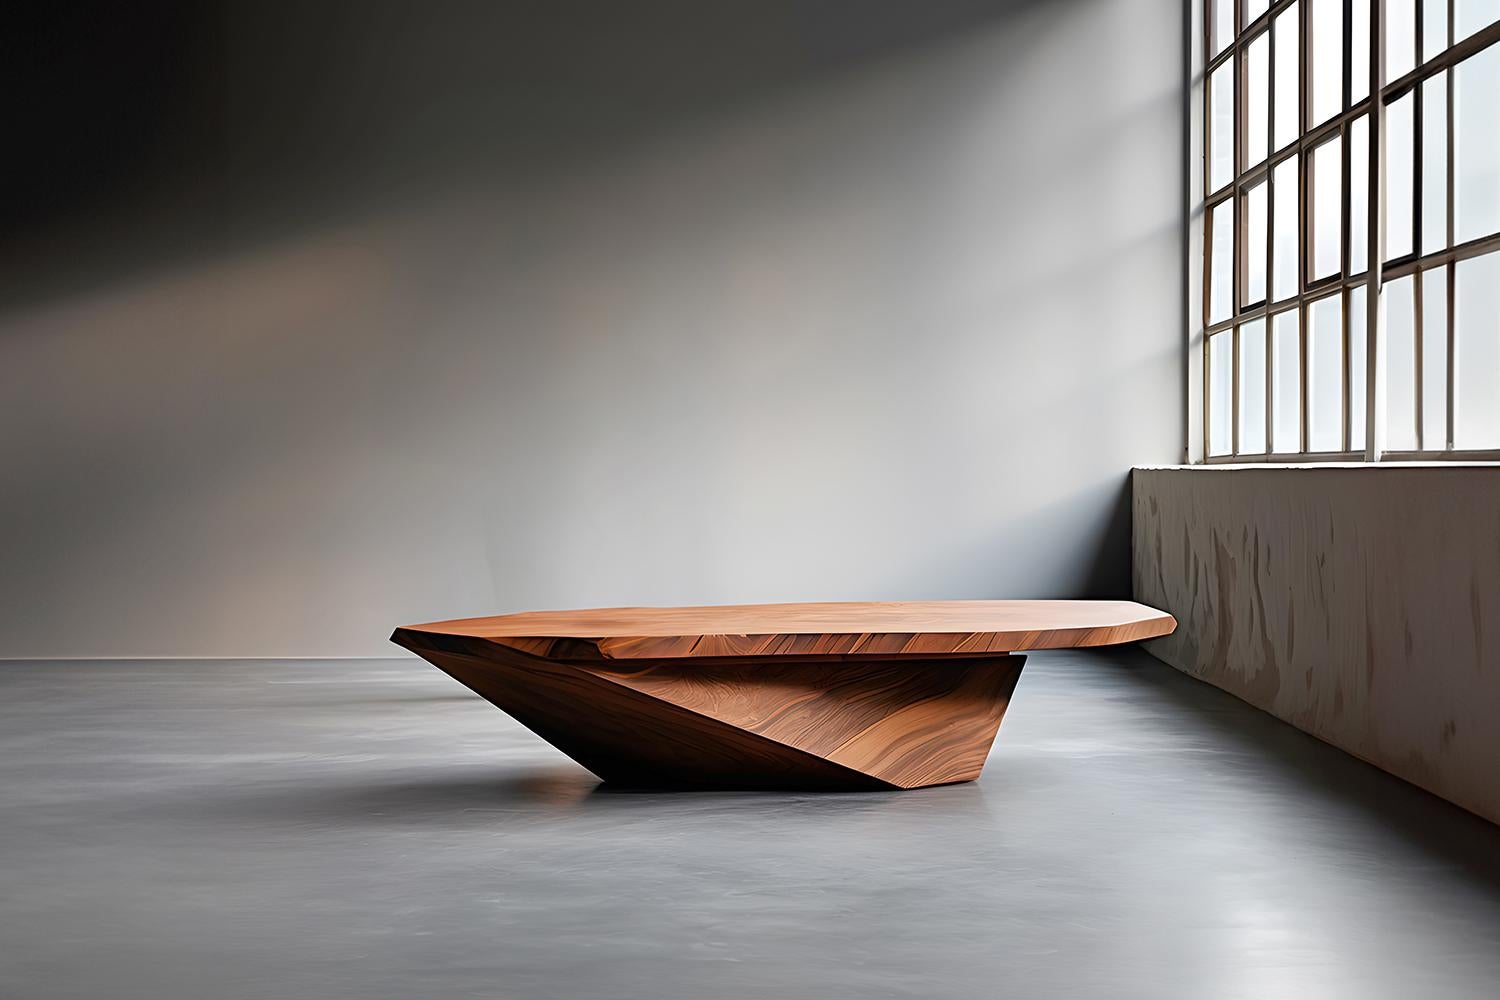 Contemporary Sculptural Coffee Table Made of Solid Wood, Center Table Solace S24 by NONO For Sale